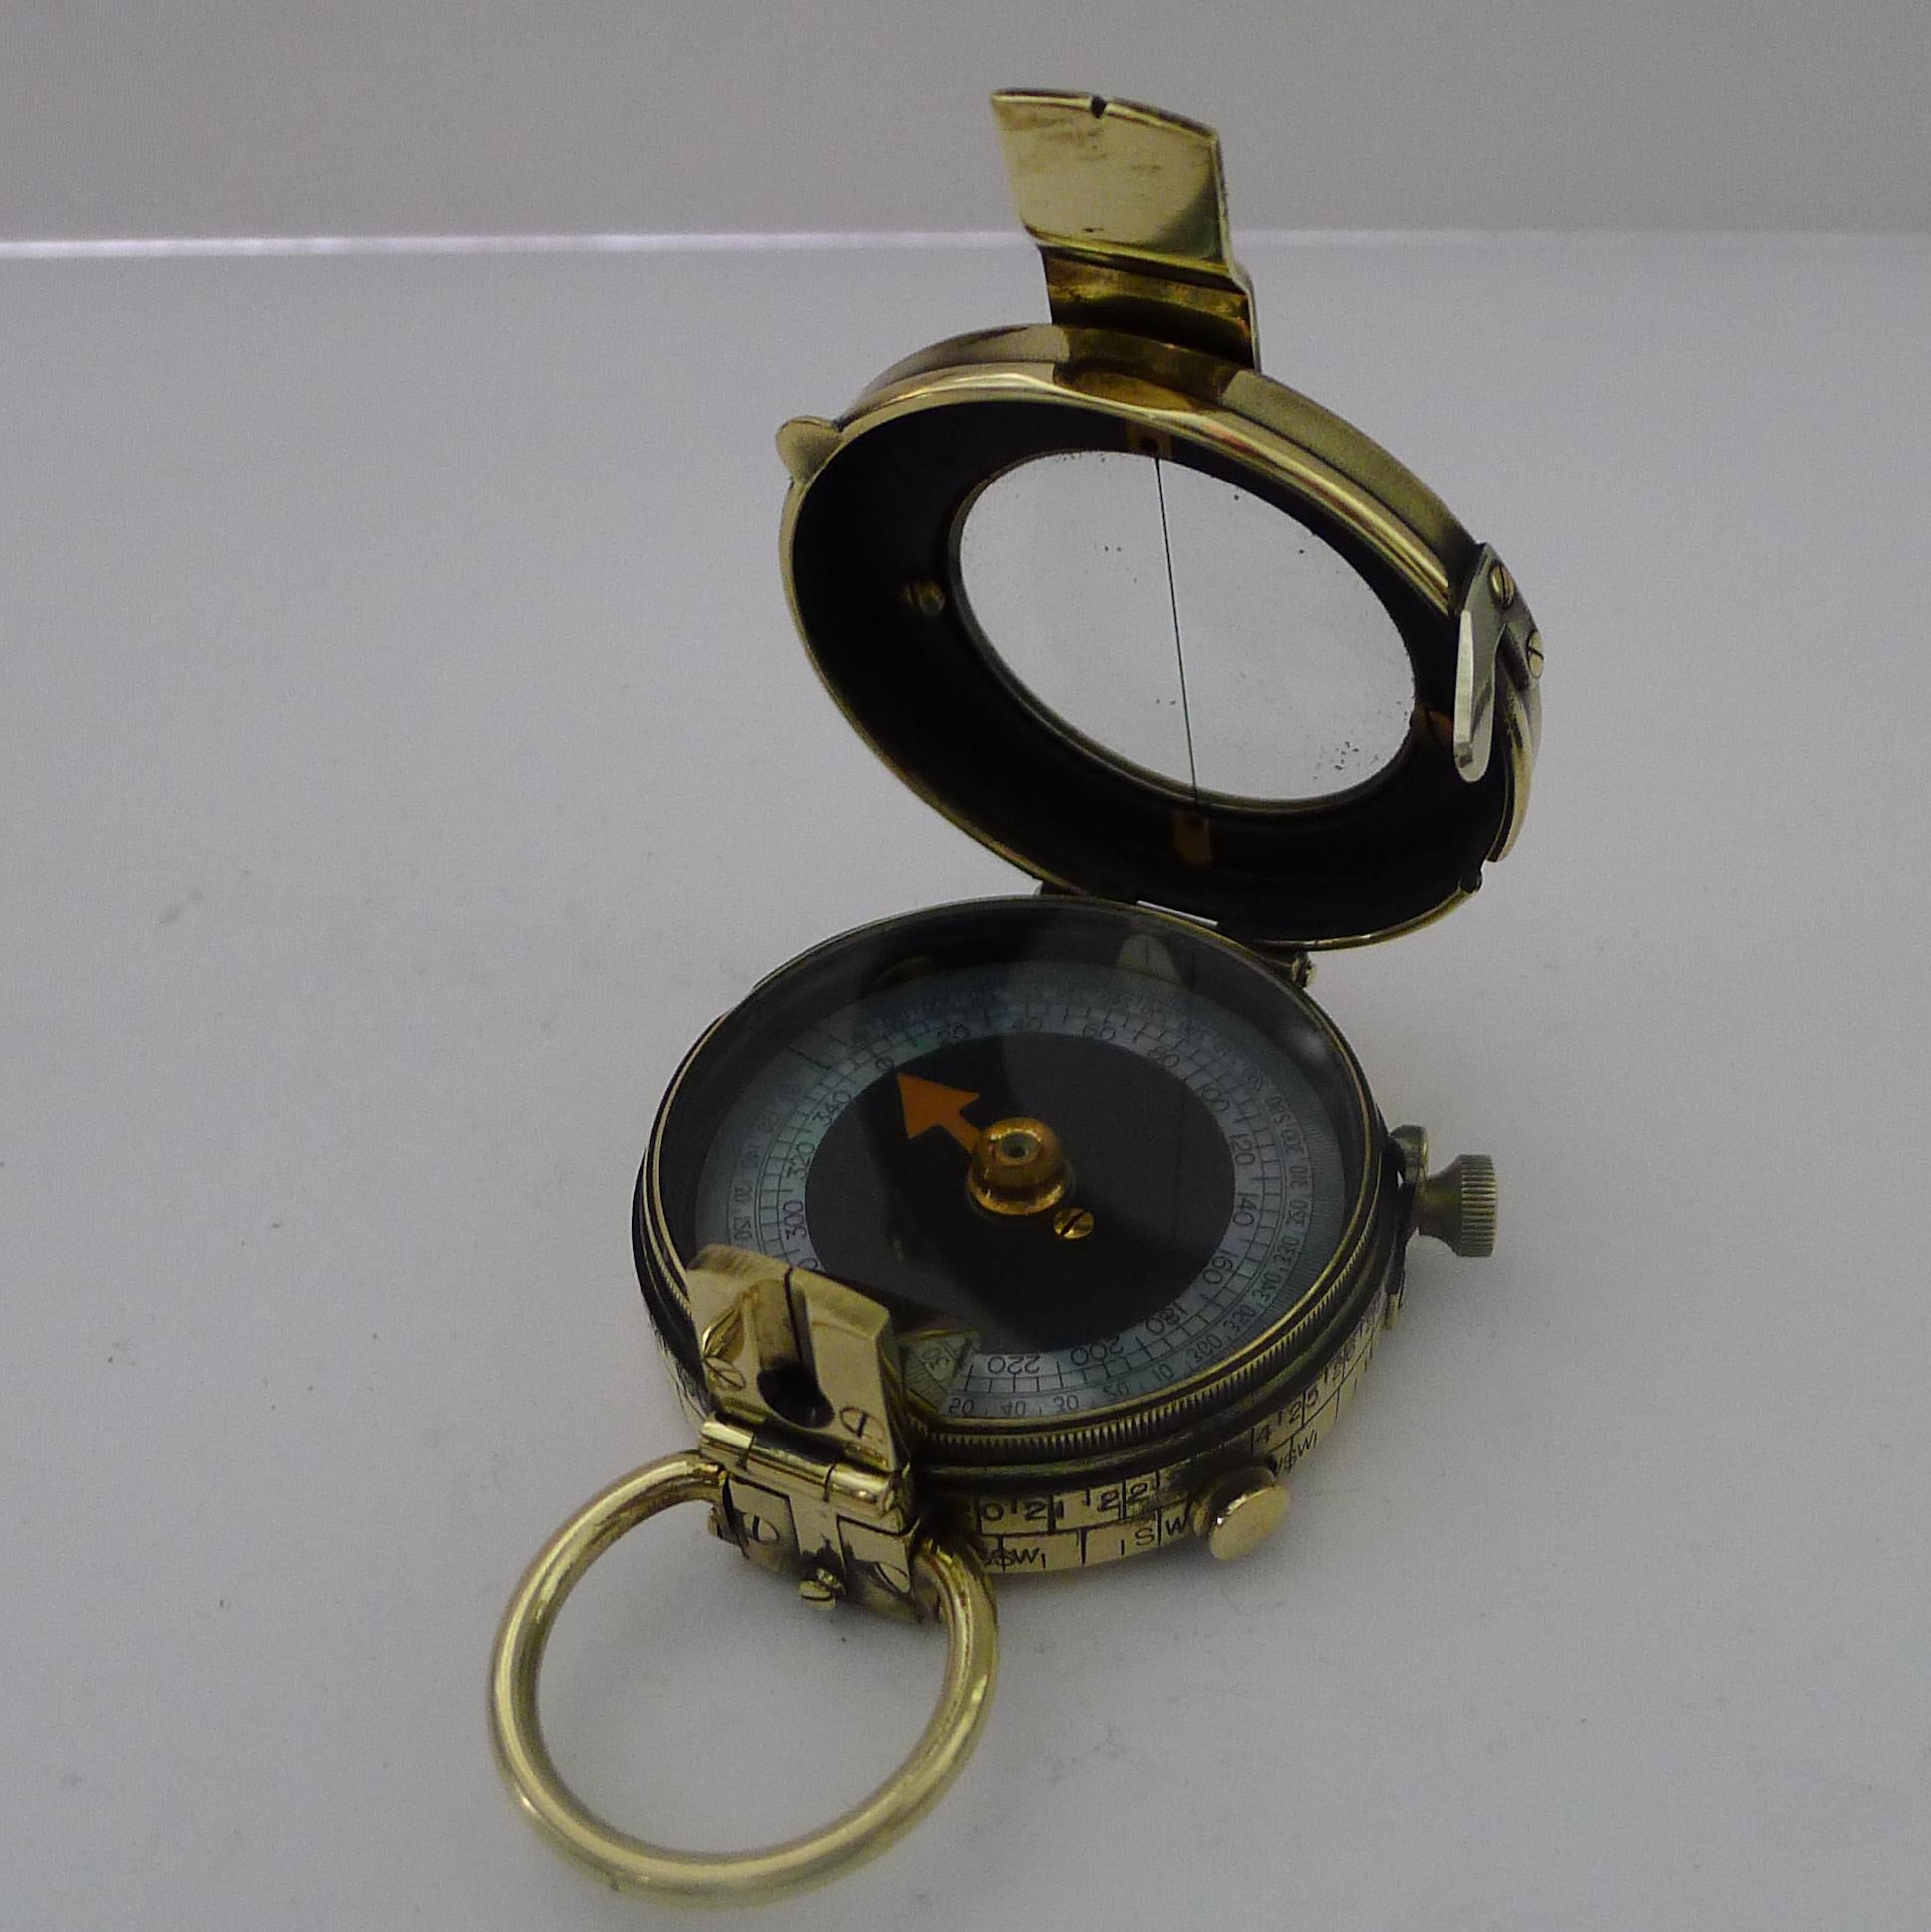 WW1 1917 British Army Officer's Compass, Verner's Patent MK VIII by French Ltd 1